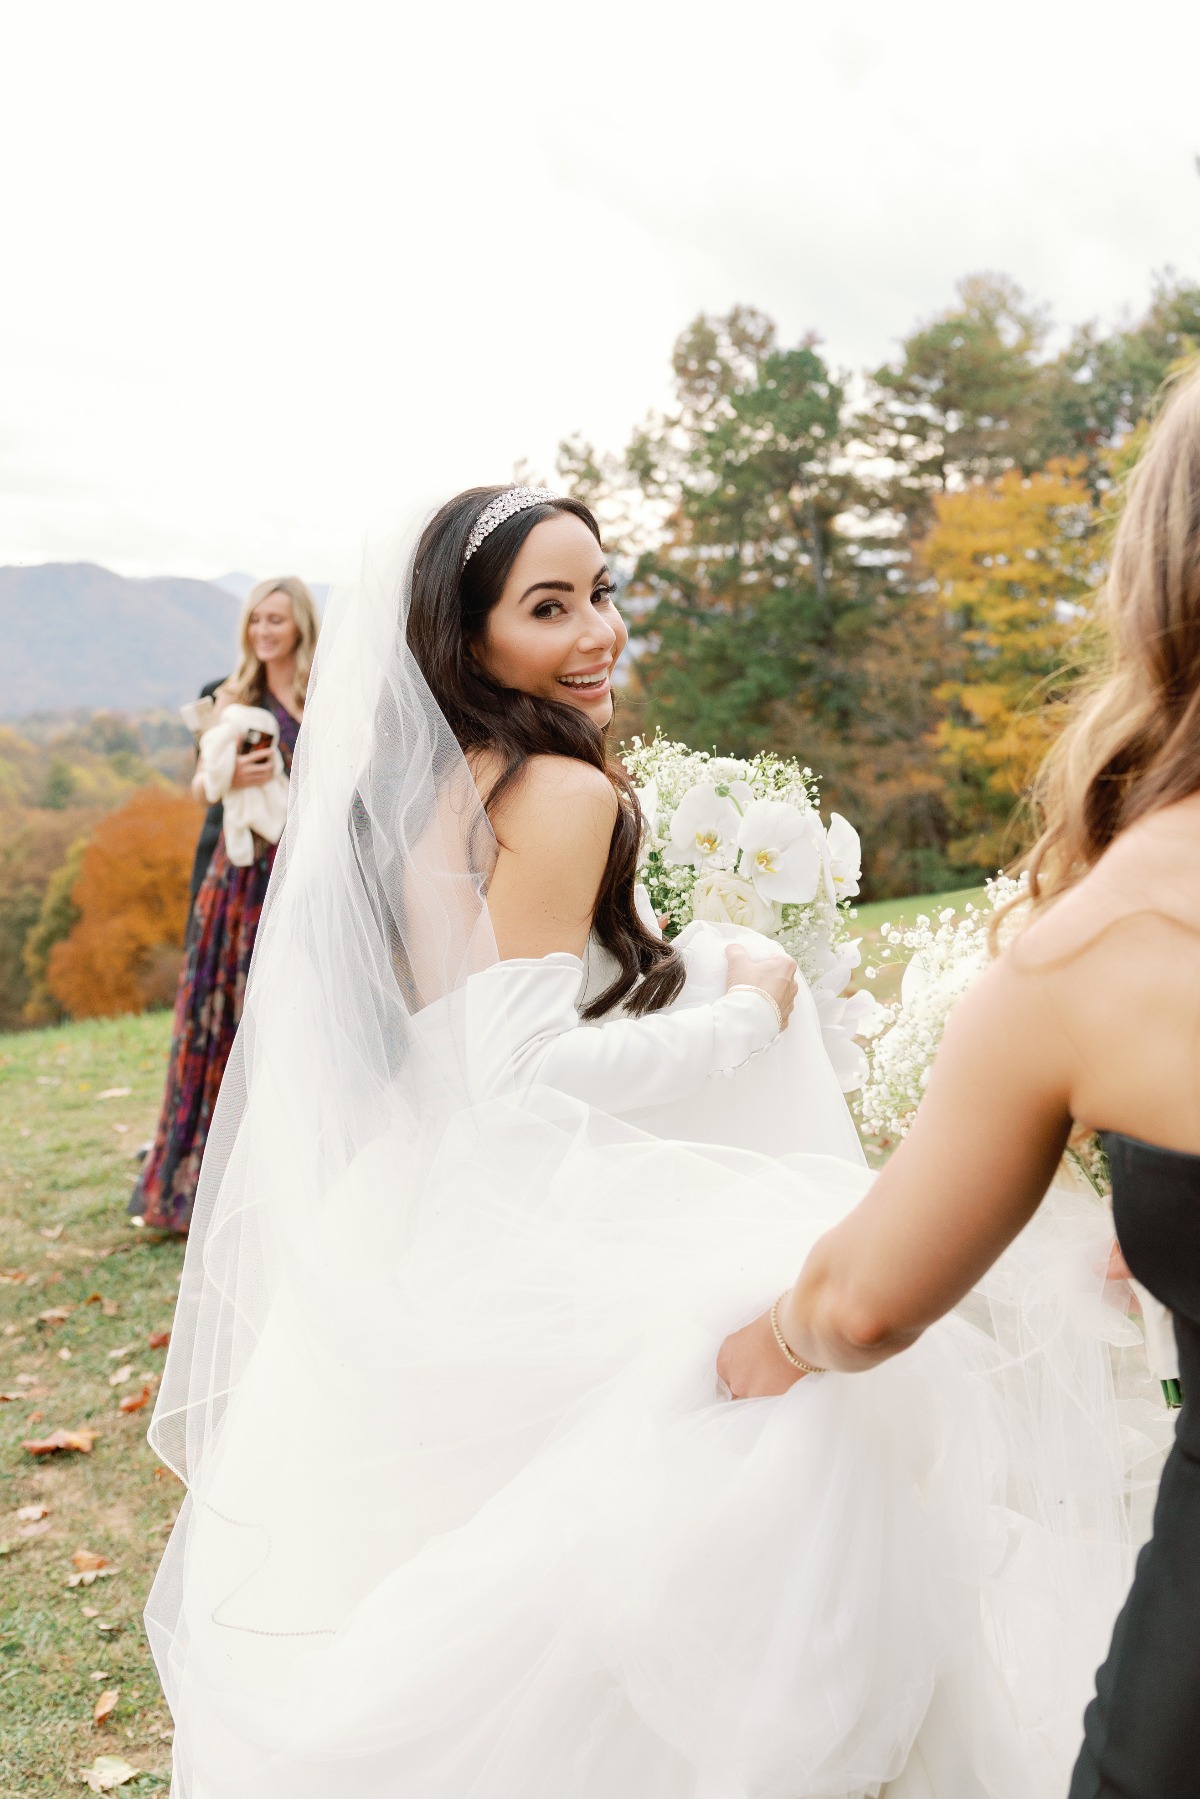 Bridesmaids helping bride carry gown to ceremony 